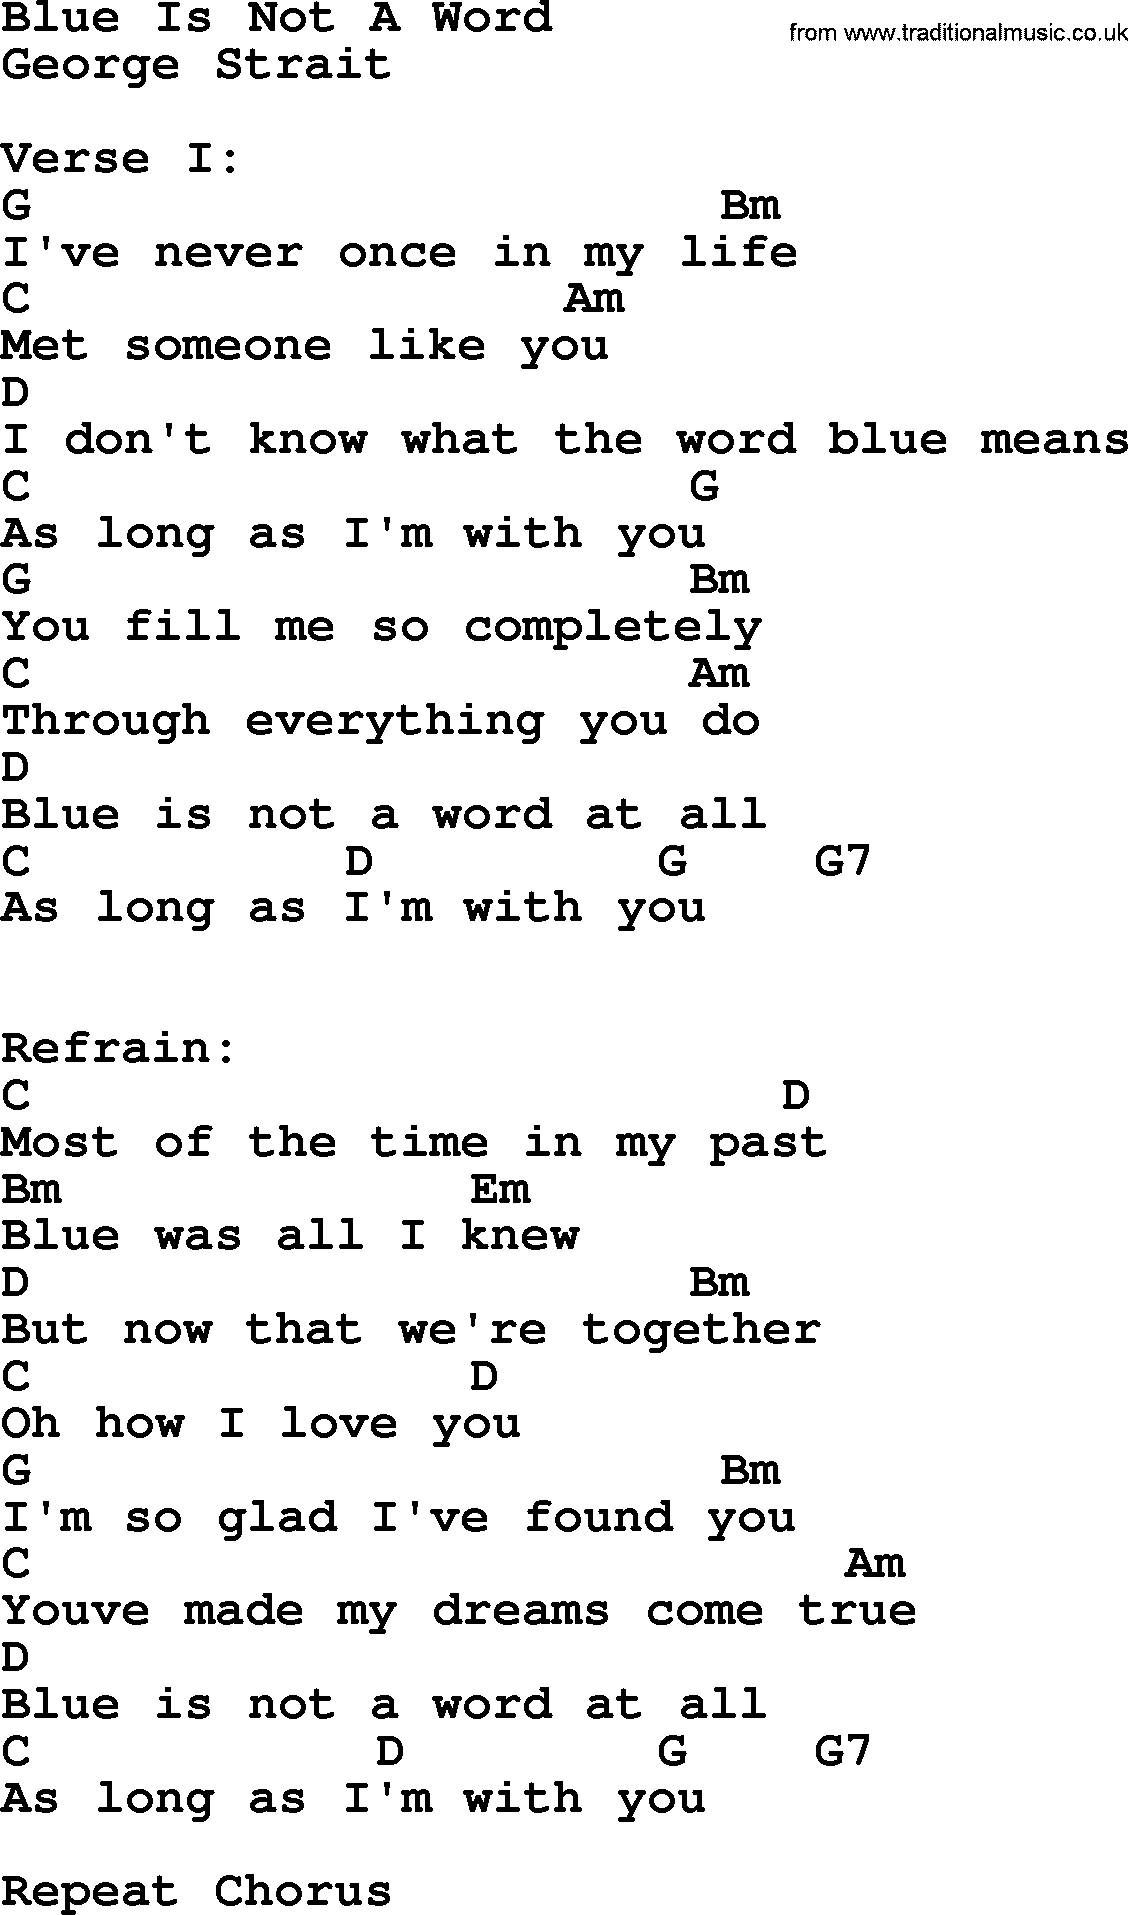 George Strait song: Blue Is Not A Word, lyrics and chords